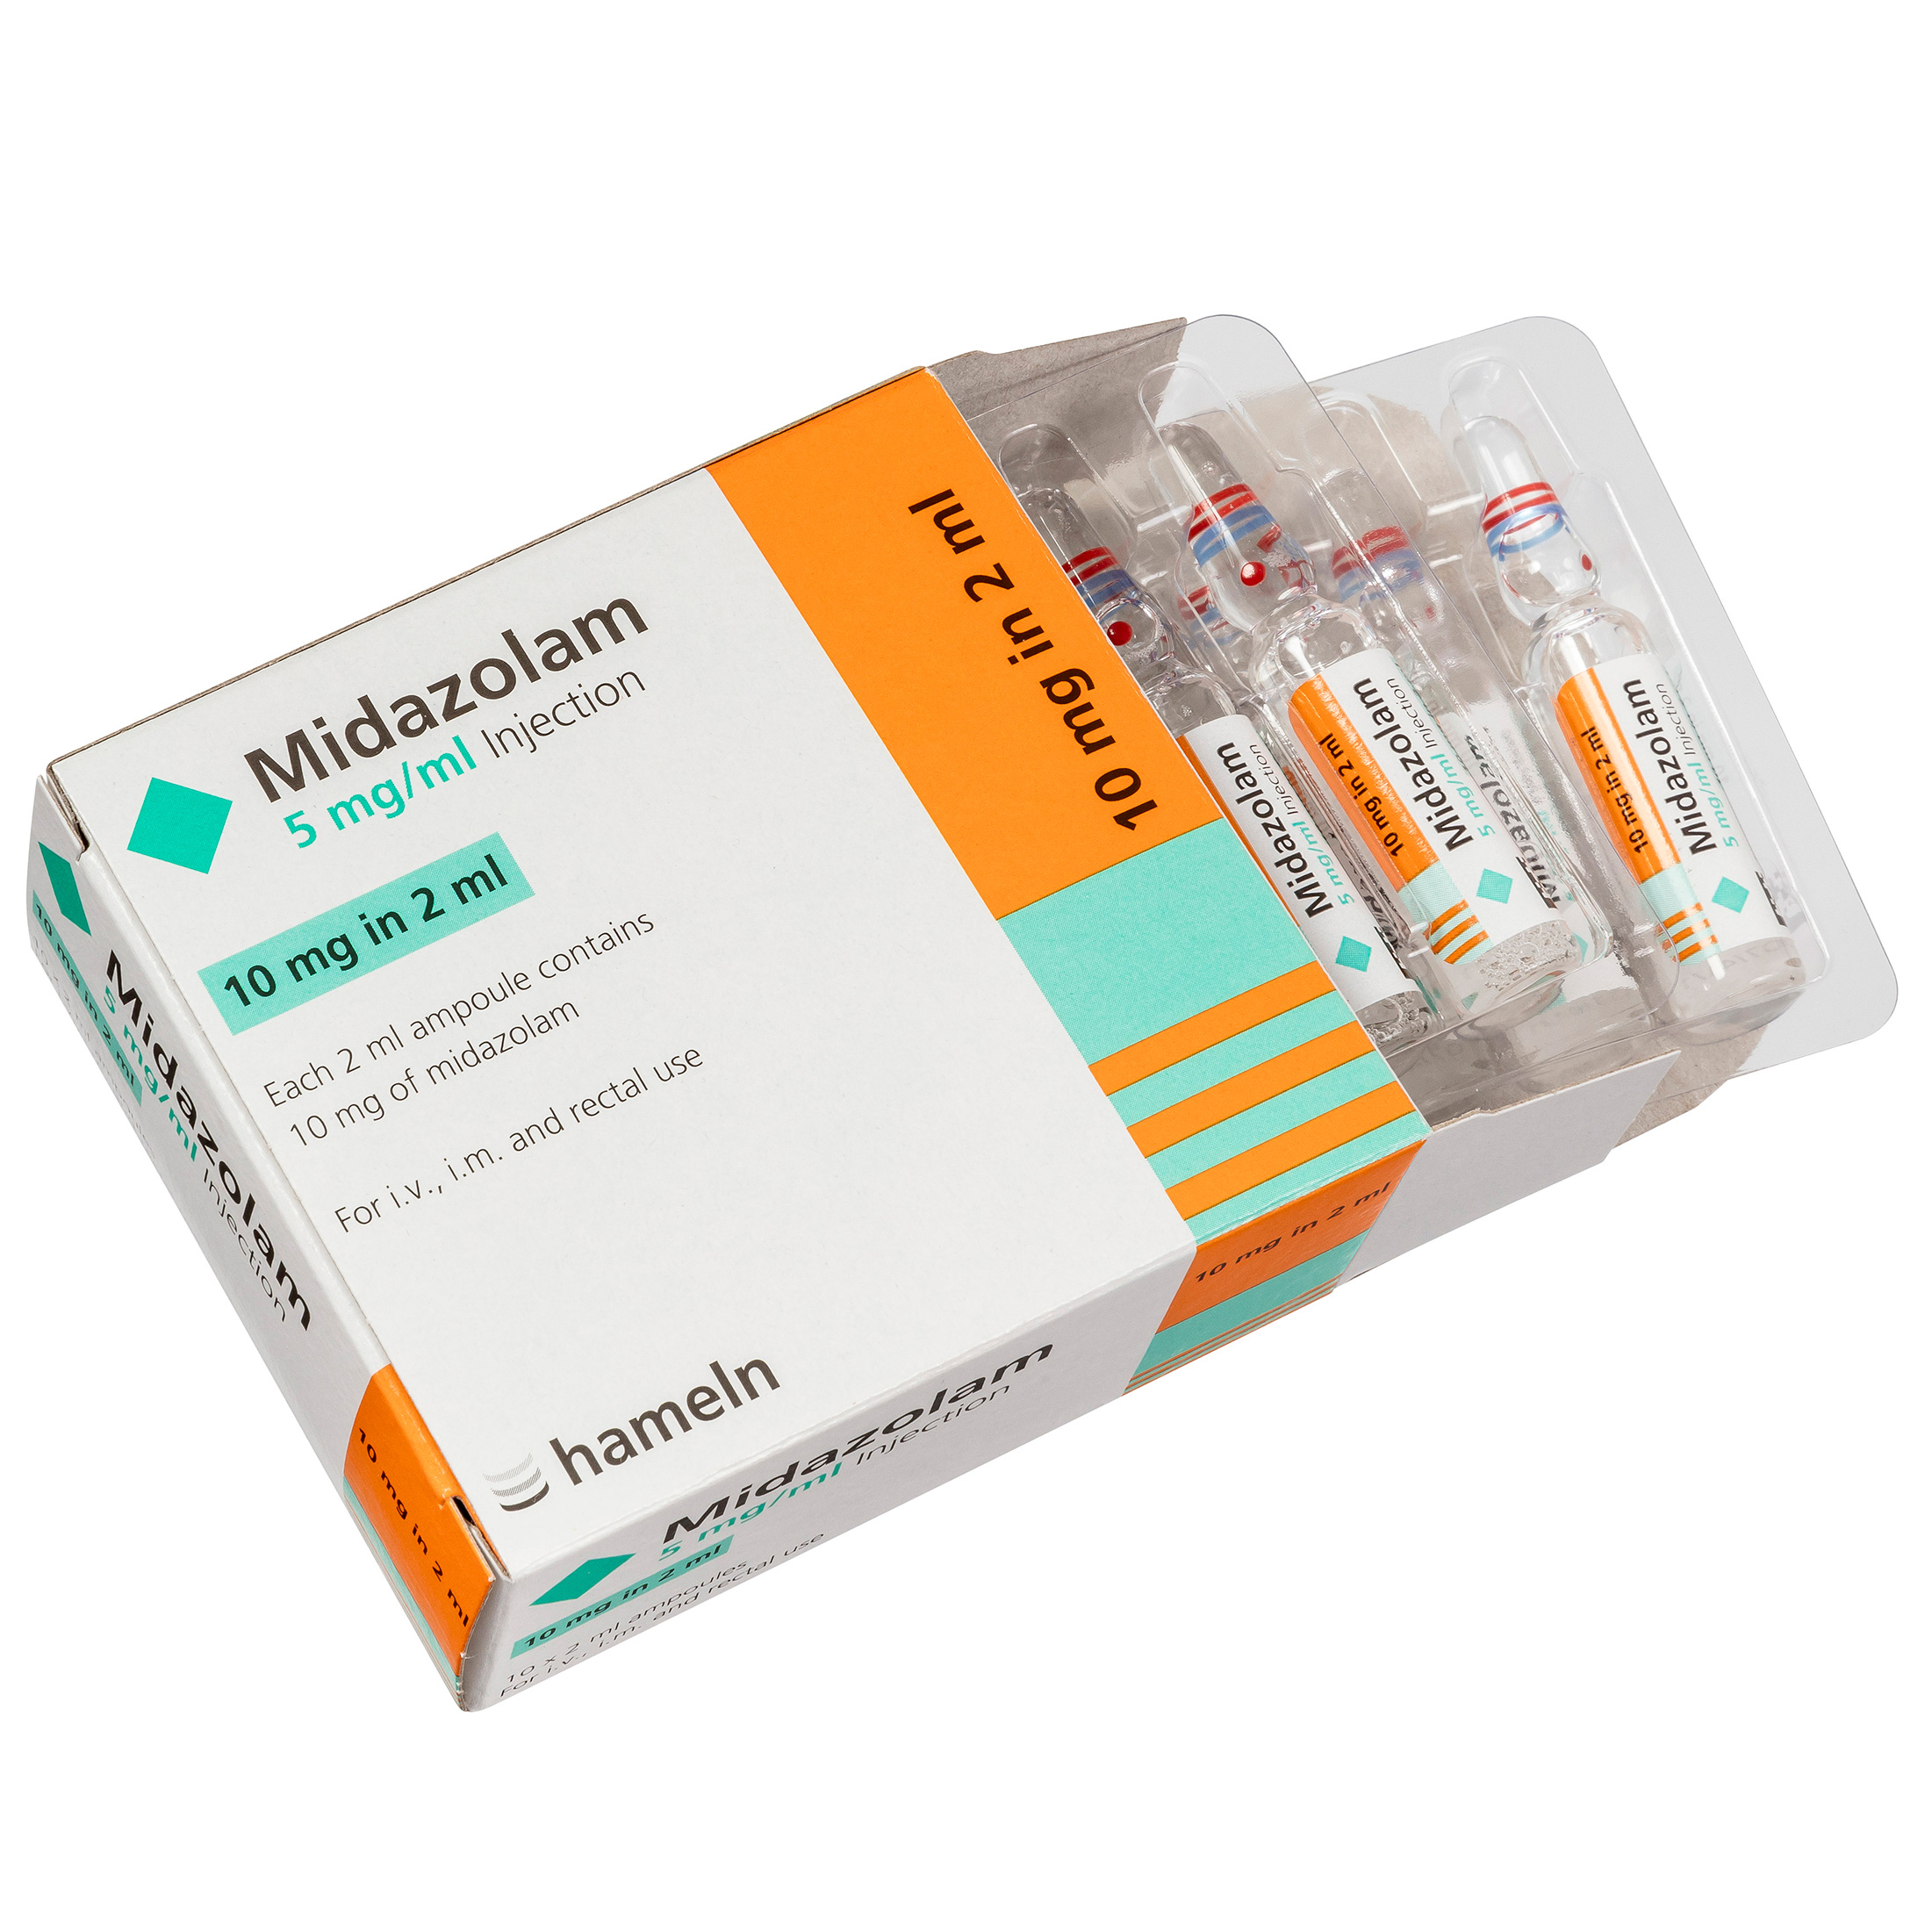 Midazolam 10mg/2ml Ampoules (5mg/ml solution) 